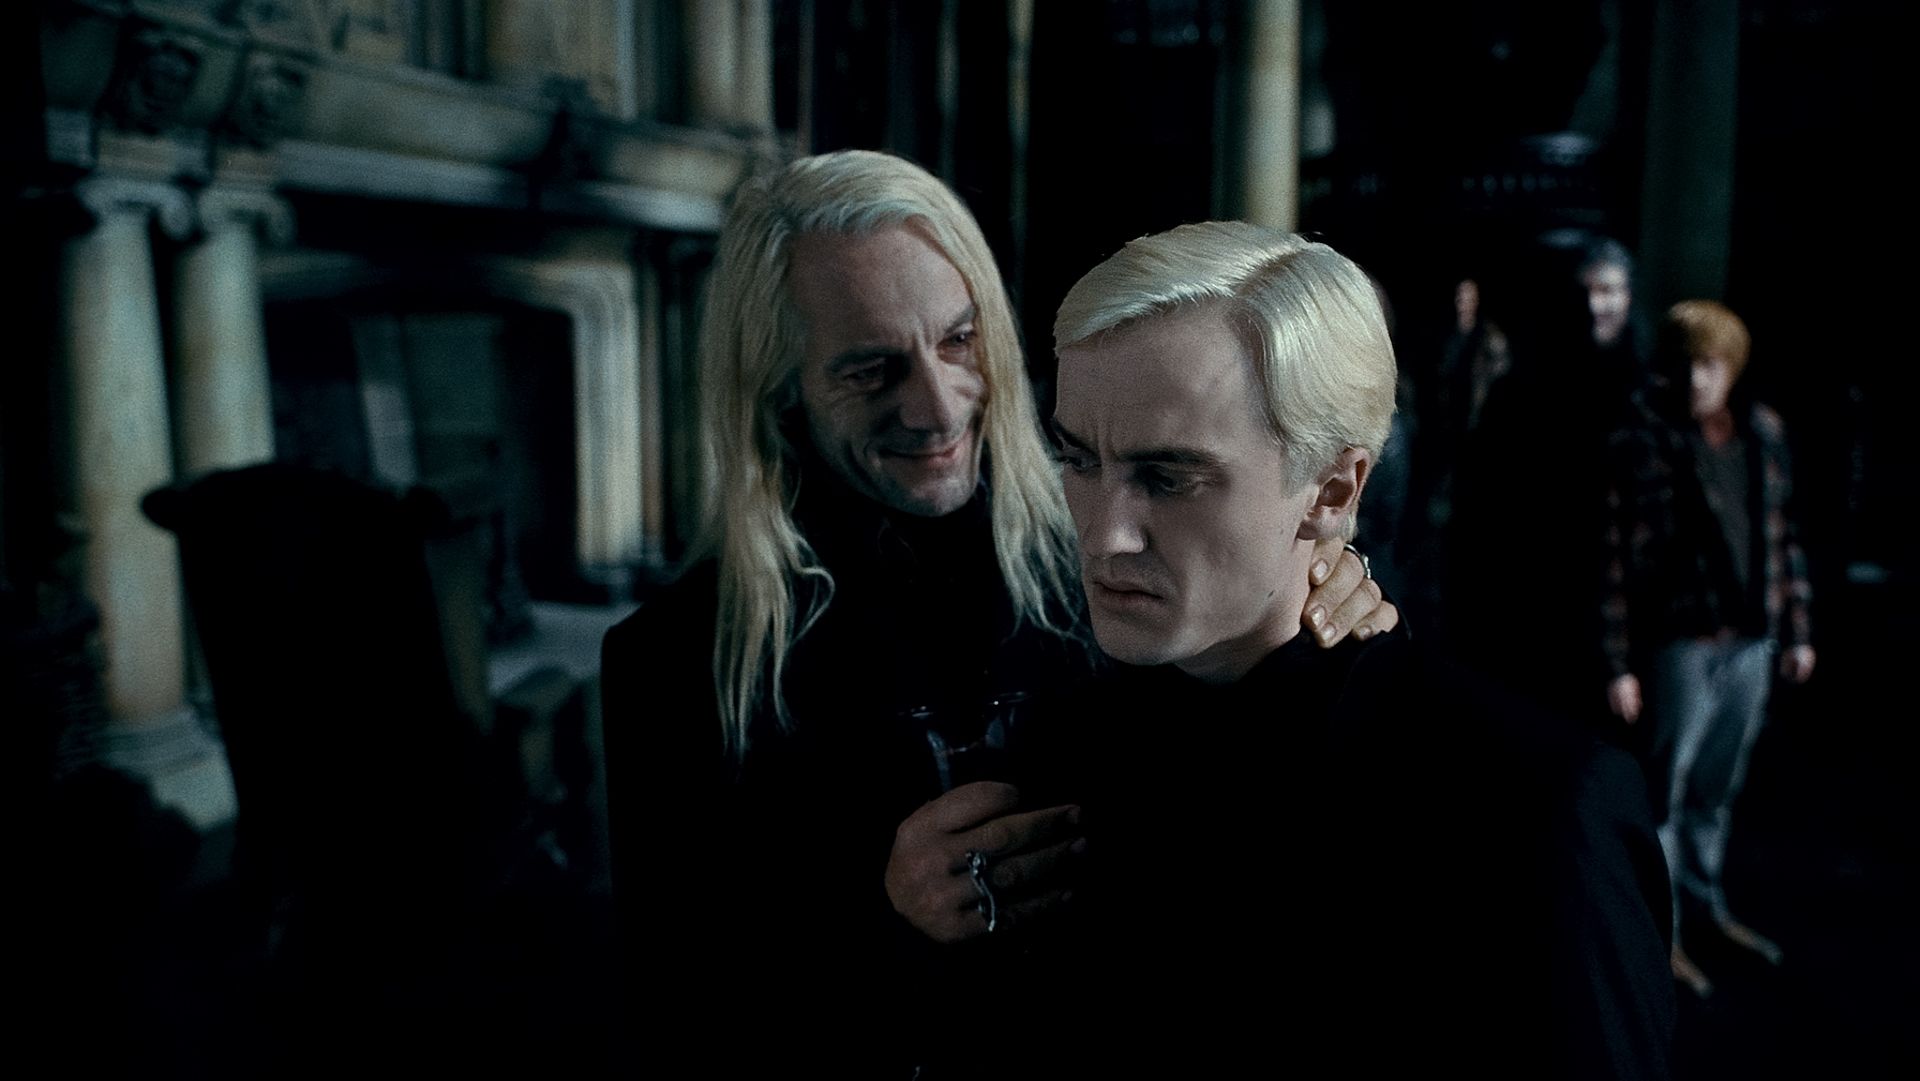 Jason Isaacs and Tom Felton as Lucius and Draco Malfoy